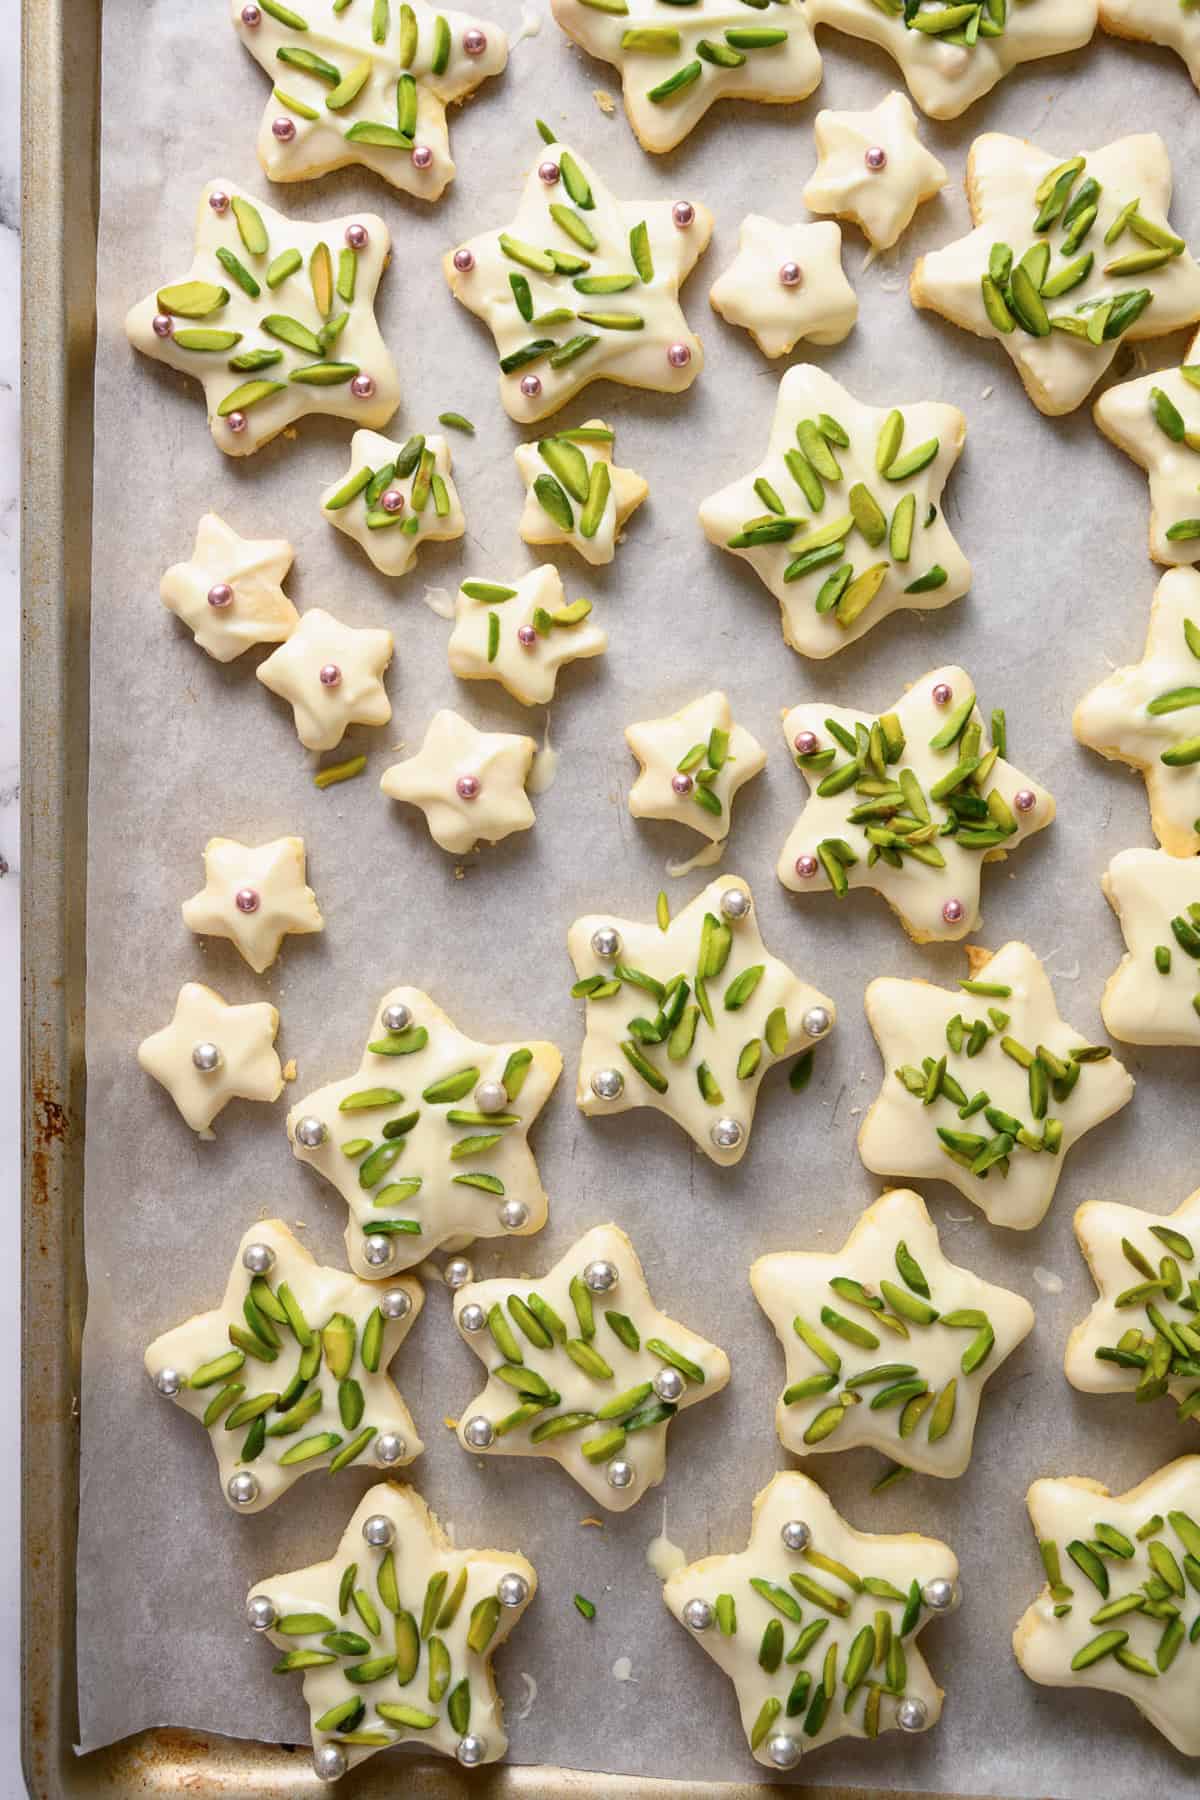 An overhead image of Christmas star cookies decorated with white chocolate and pistachios.